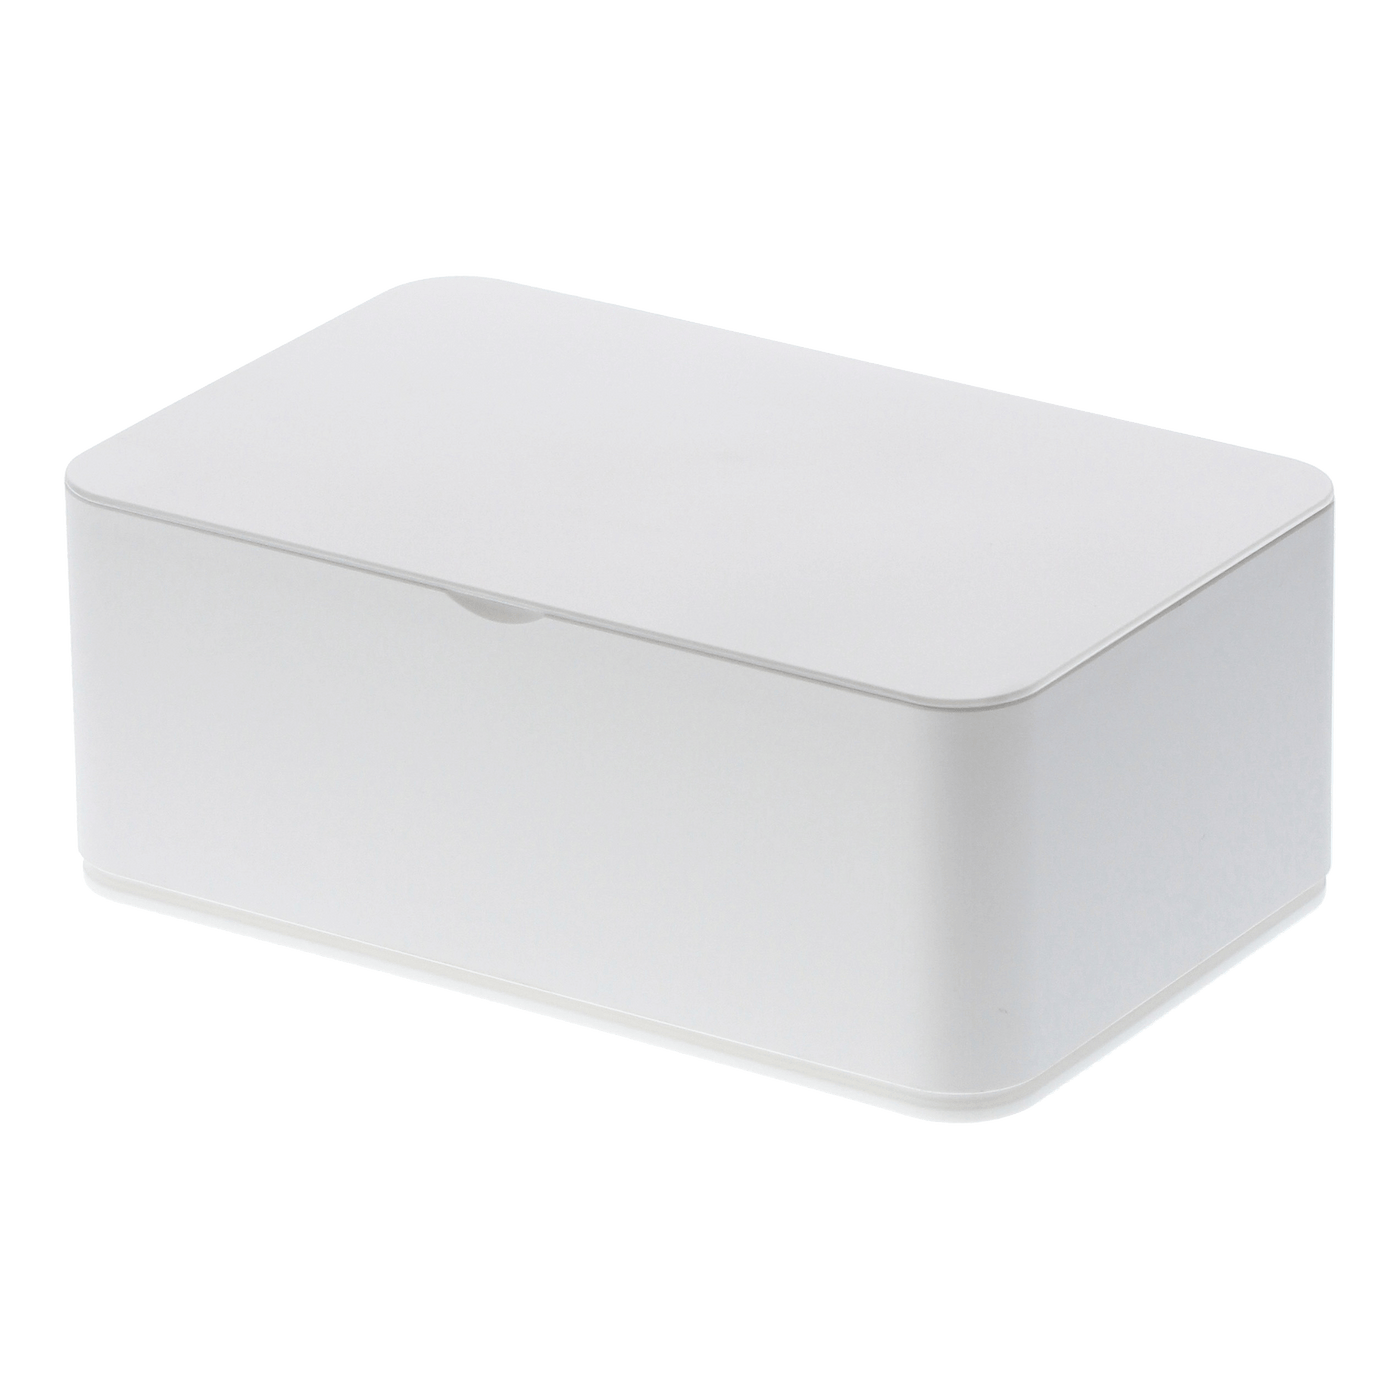 Wet tissue box from Yamazaki in white with the lid open